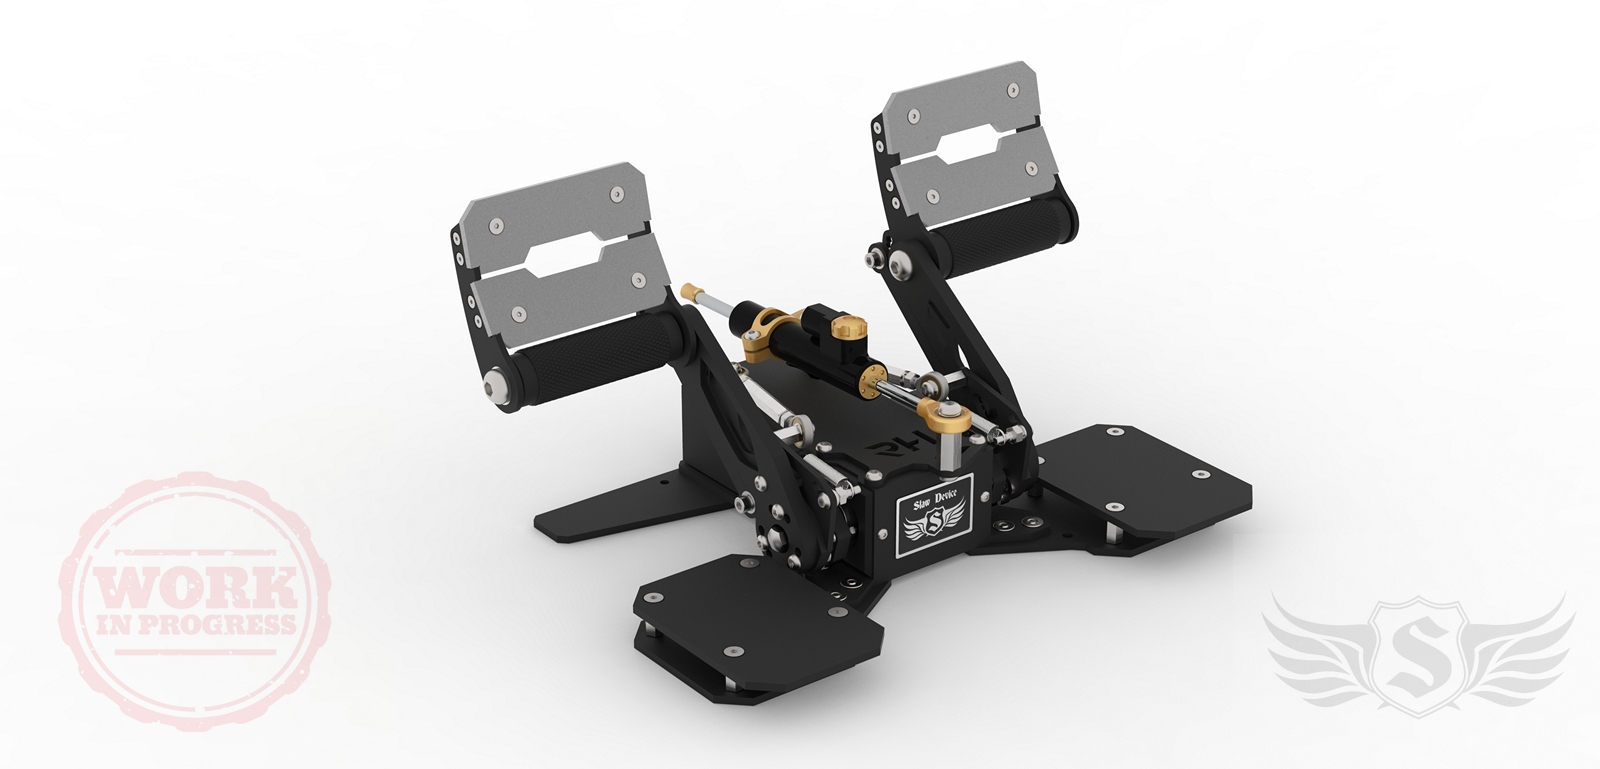 RH ROTOR rudder pedals Part 1 - Unboxing 